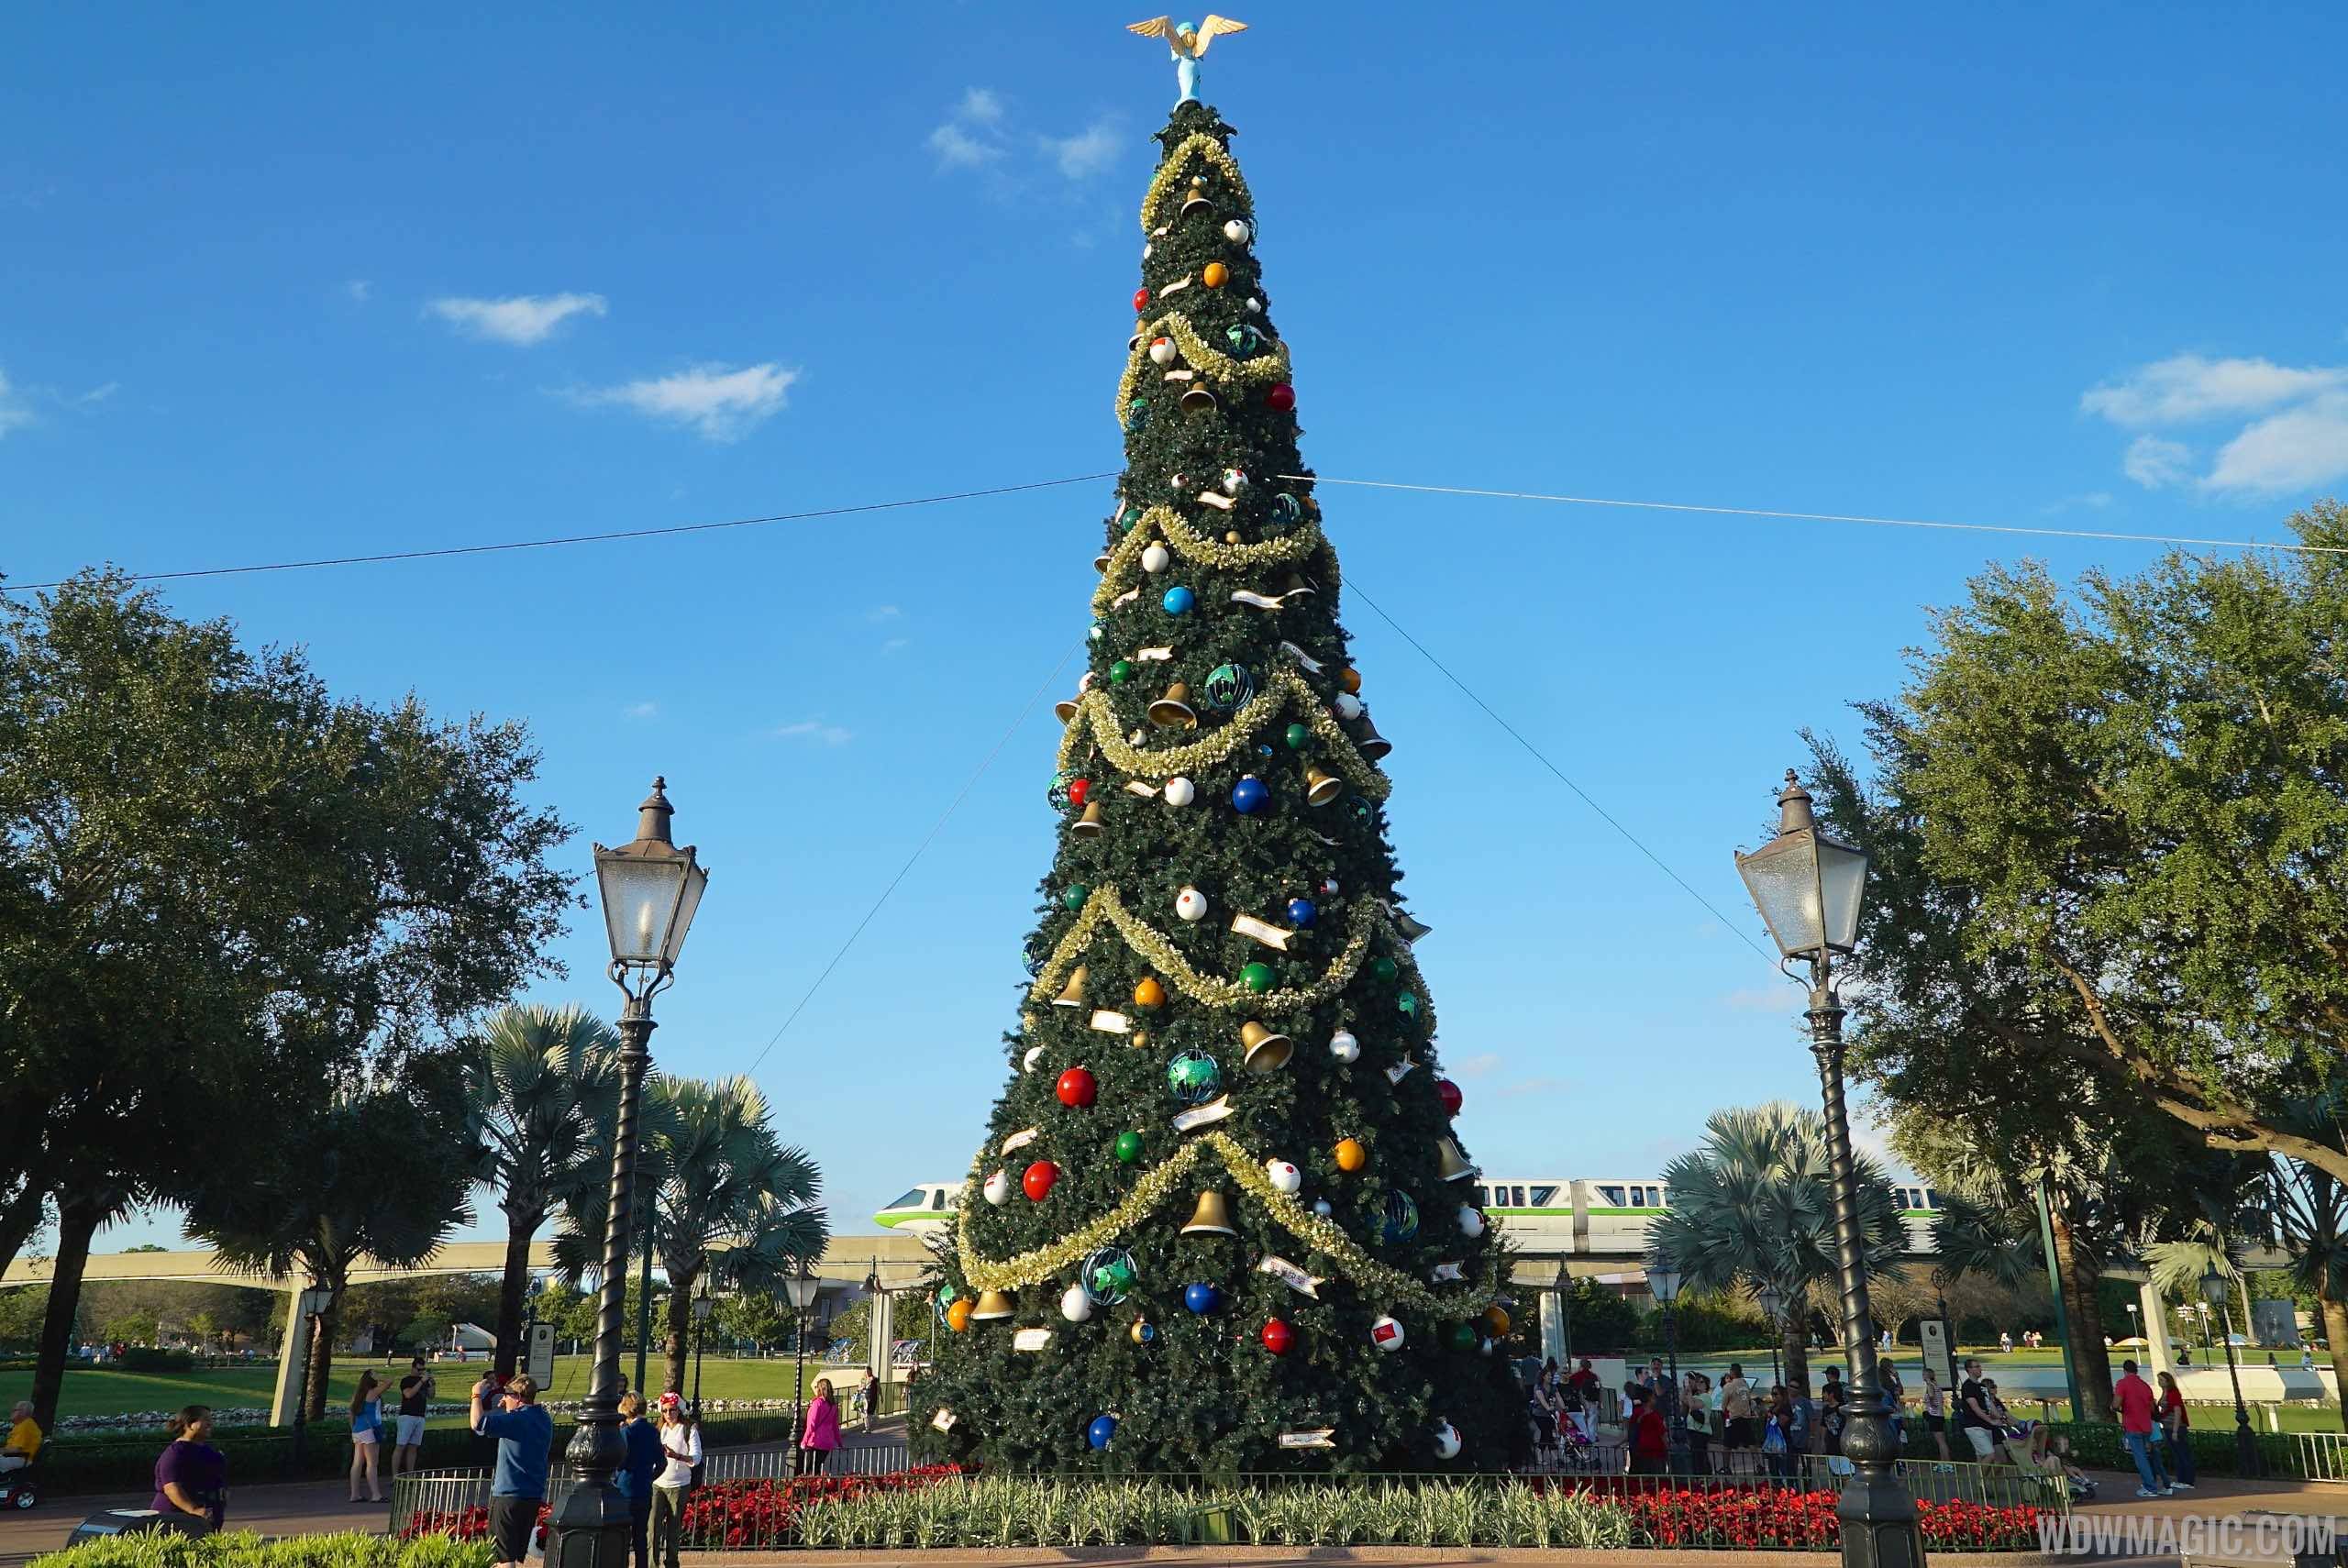 Full Entertainment Line Up And Schedule For The 16 Holidays Around The World At Epcot